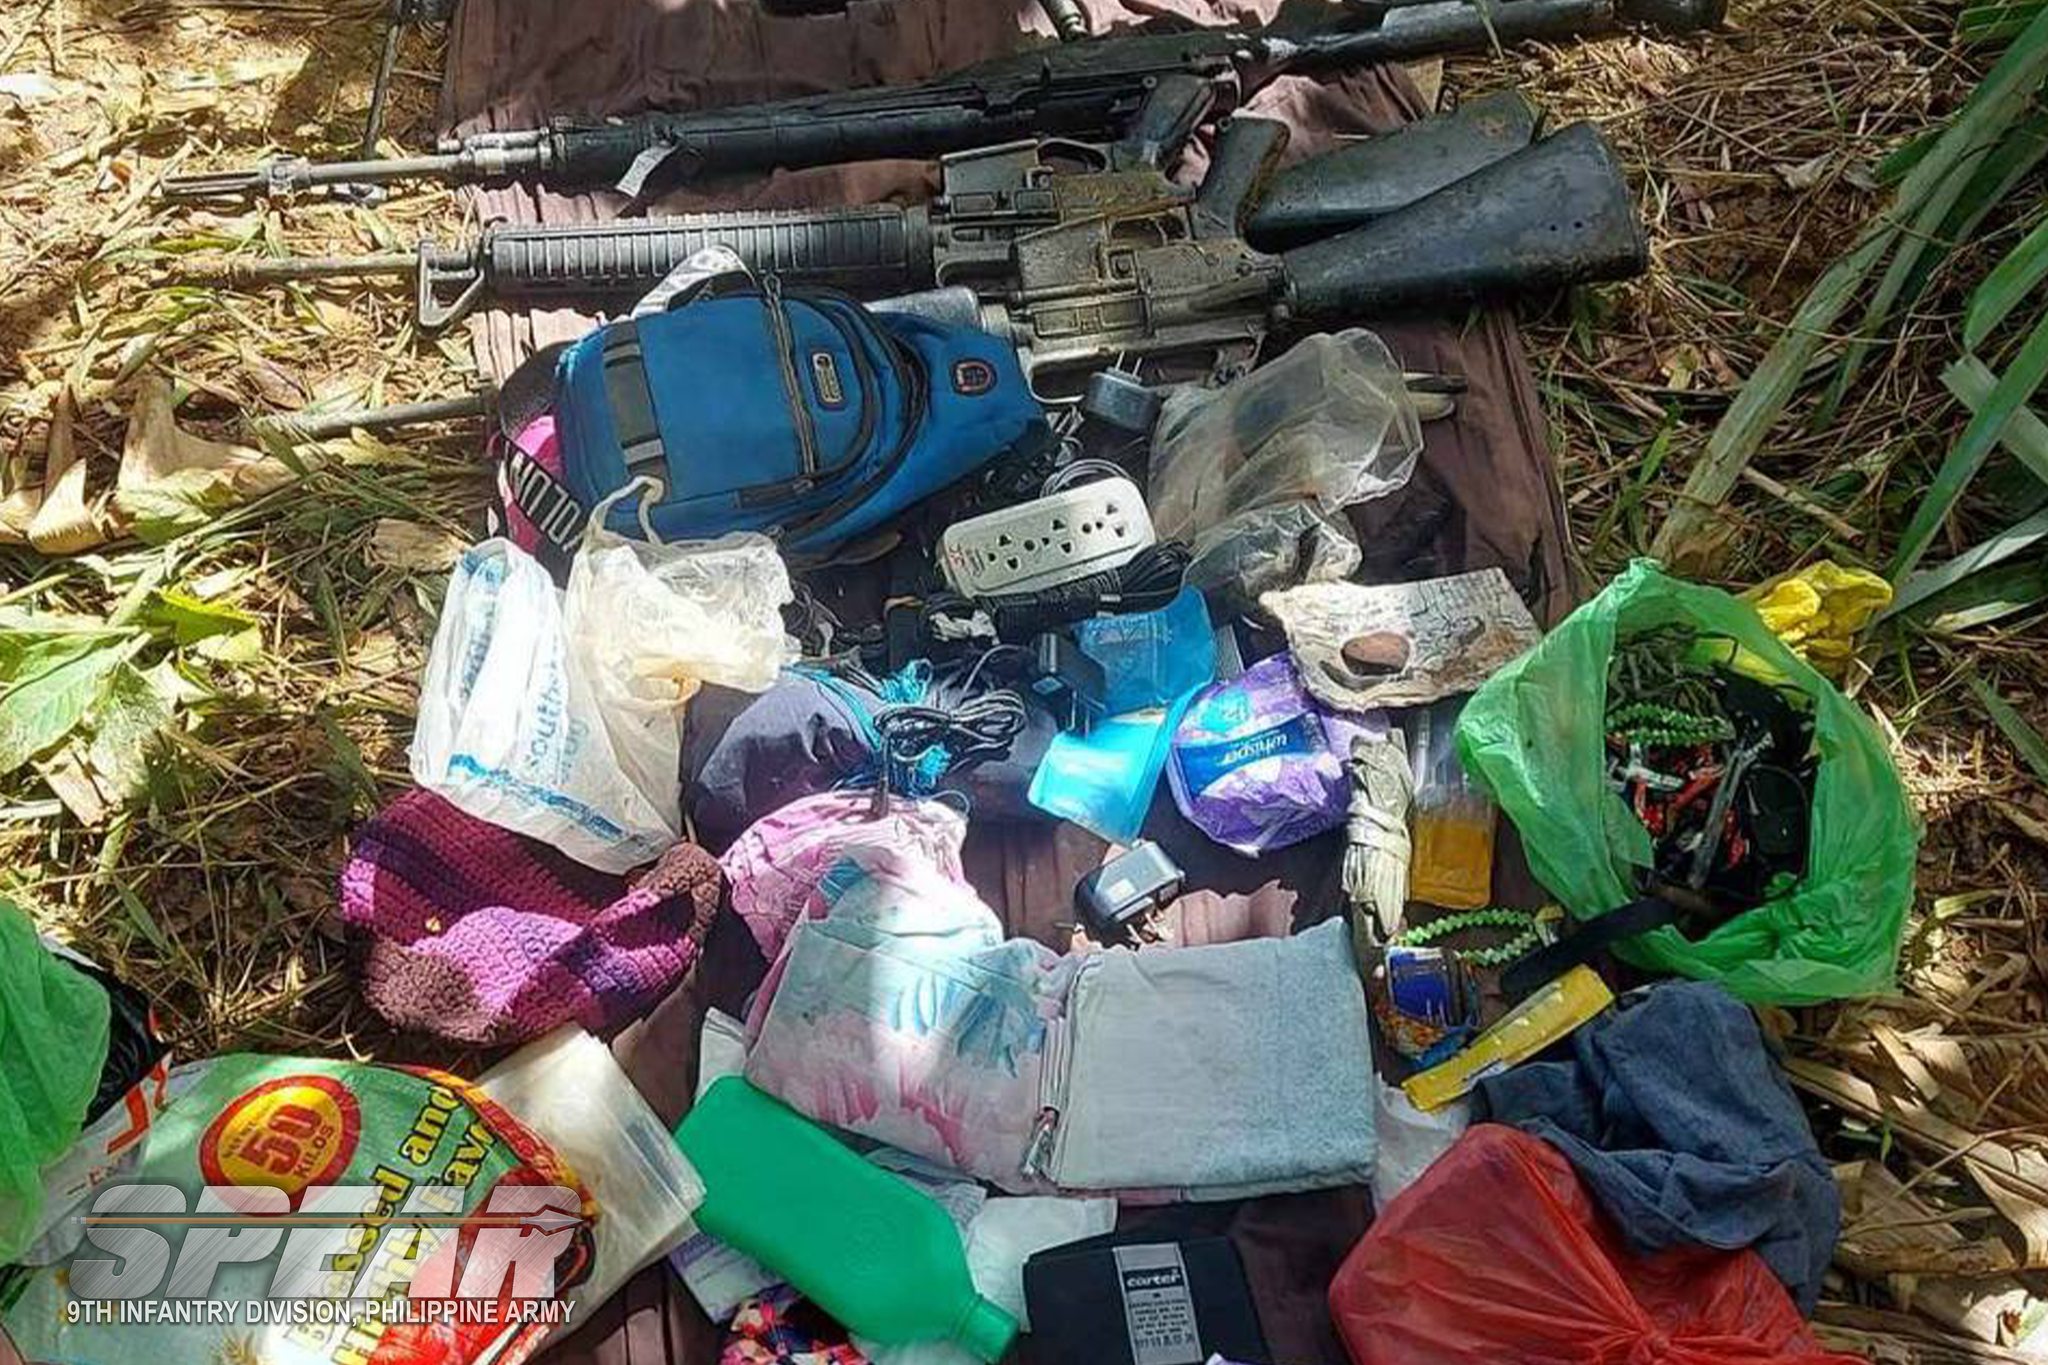 Government Forces Neutralized NPA Member and Seized High-Powered Firearms in Camarines Sur